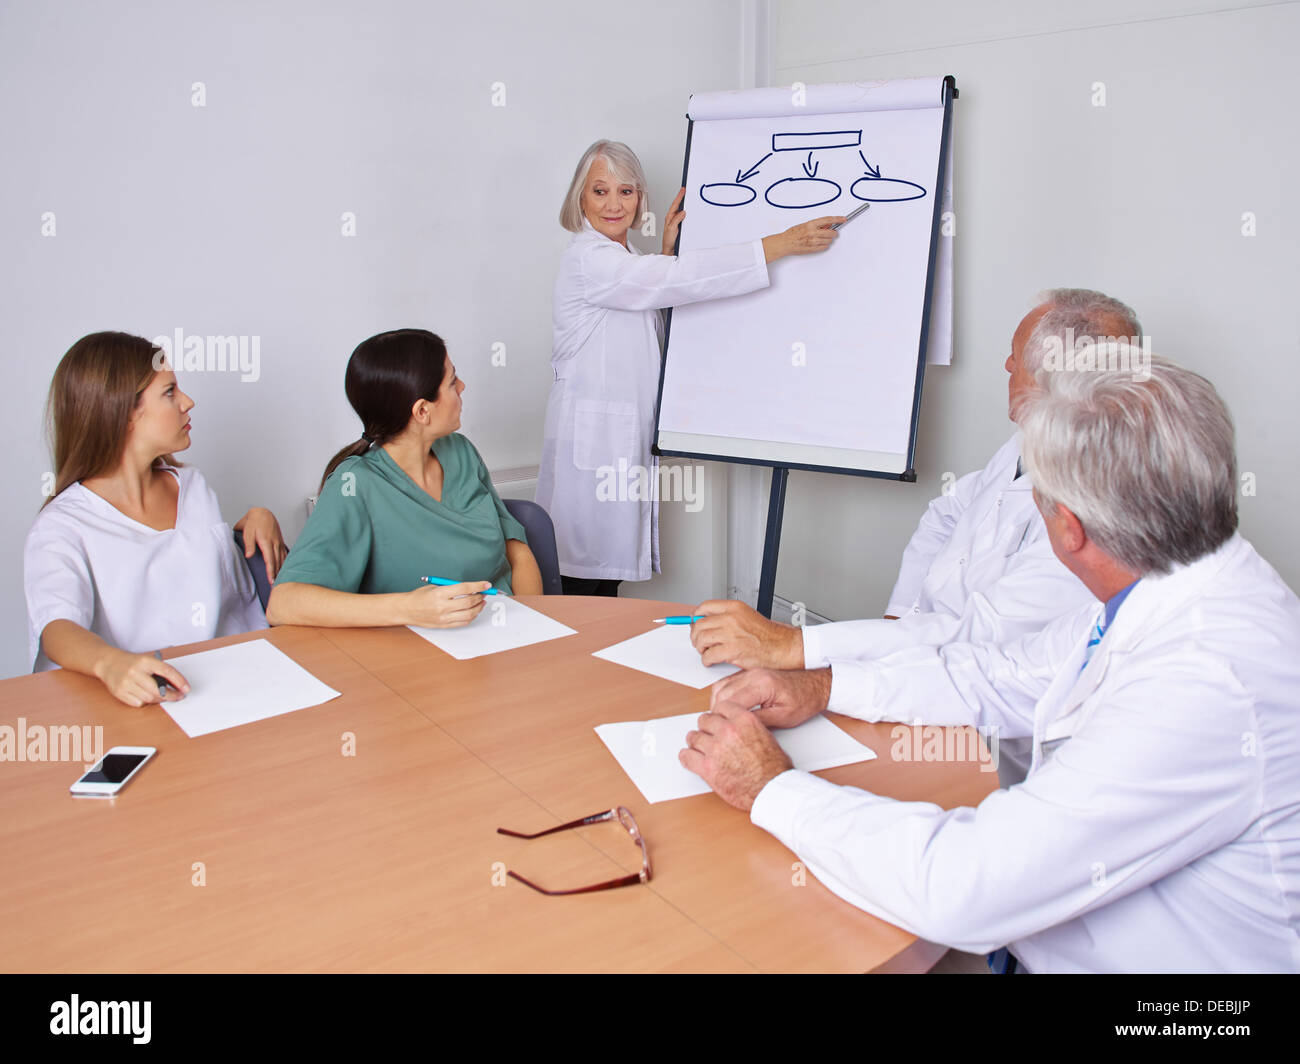 Physician on flipchart giving presentation to team colleagues Stock Photo